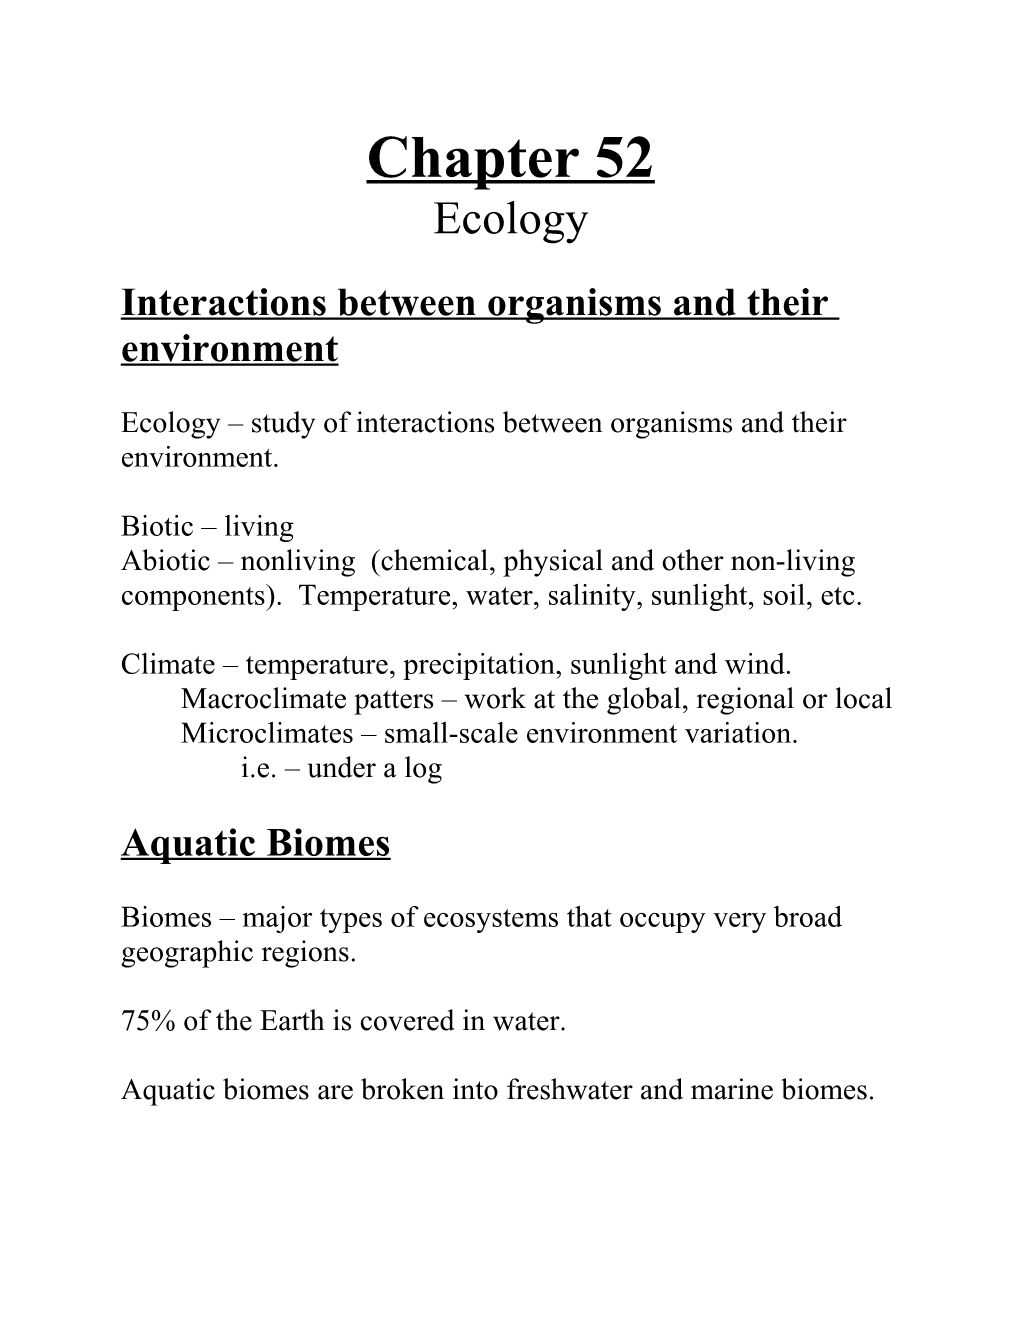 Interactions Between Organisms and Their Environment